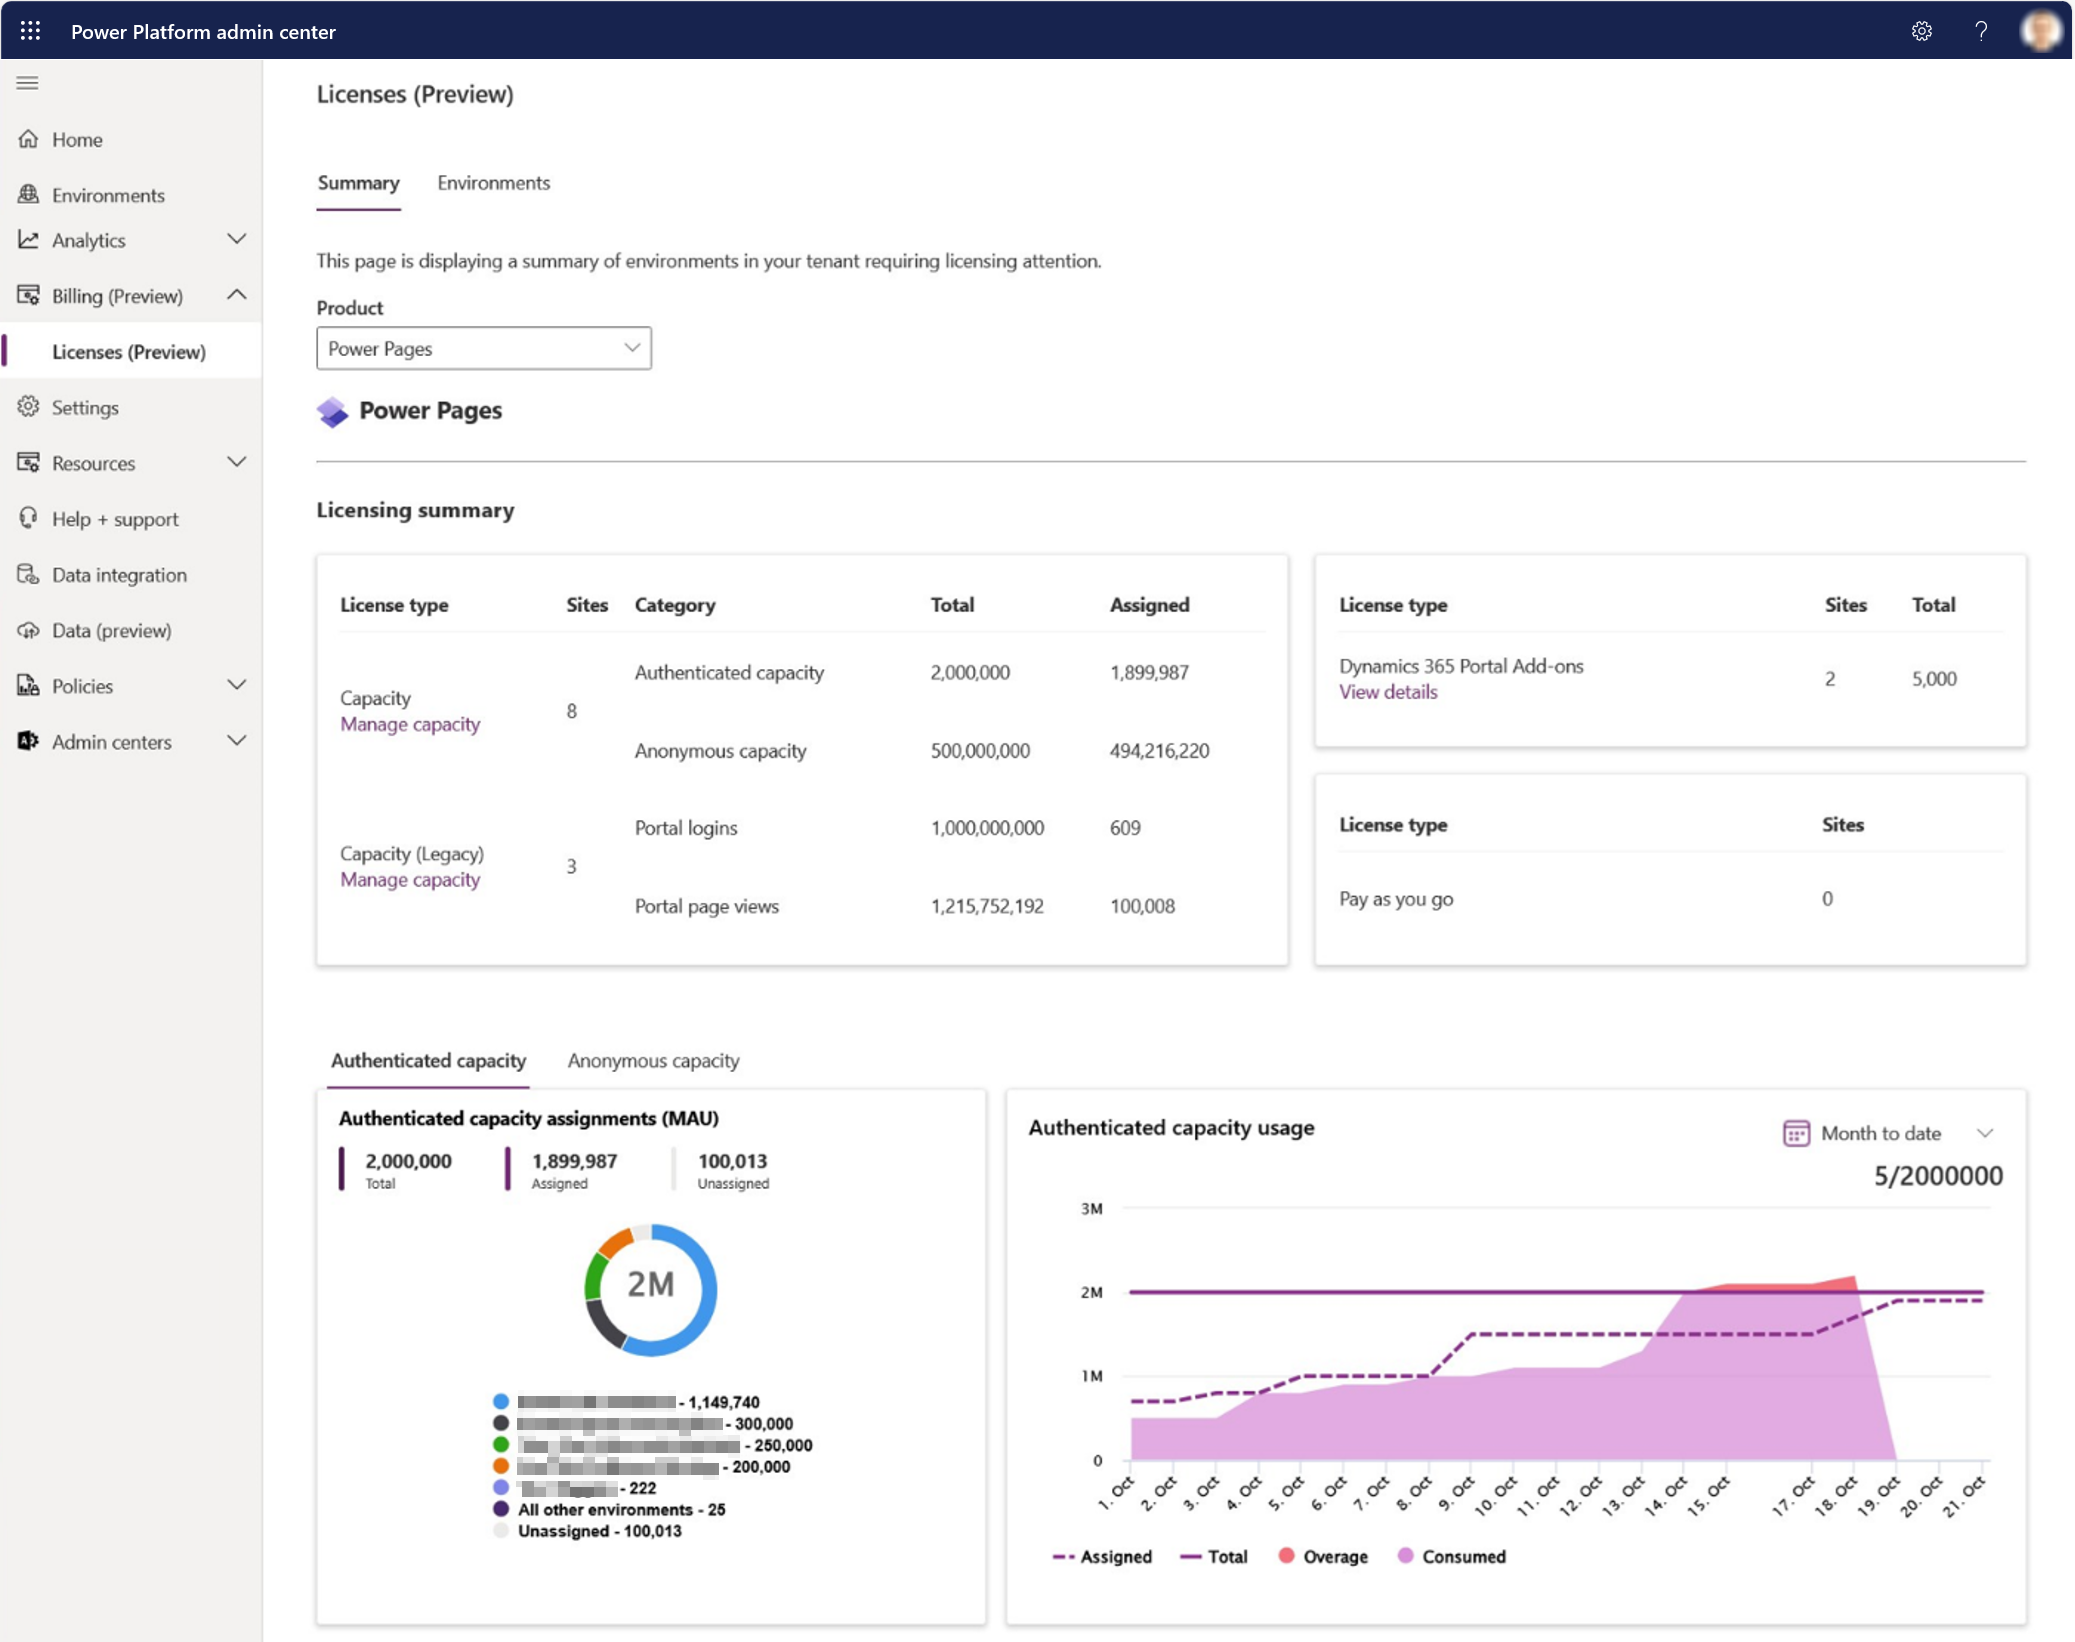 A screenshot of the Licensing Summary tenant-level view inside of Power Platform admin center.